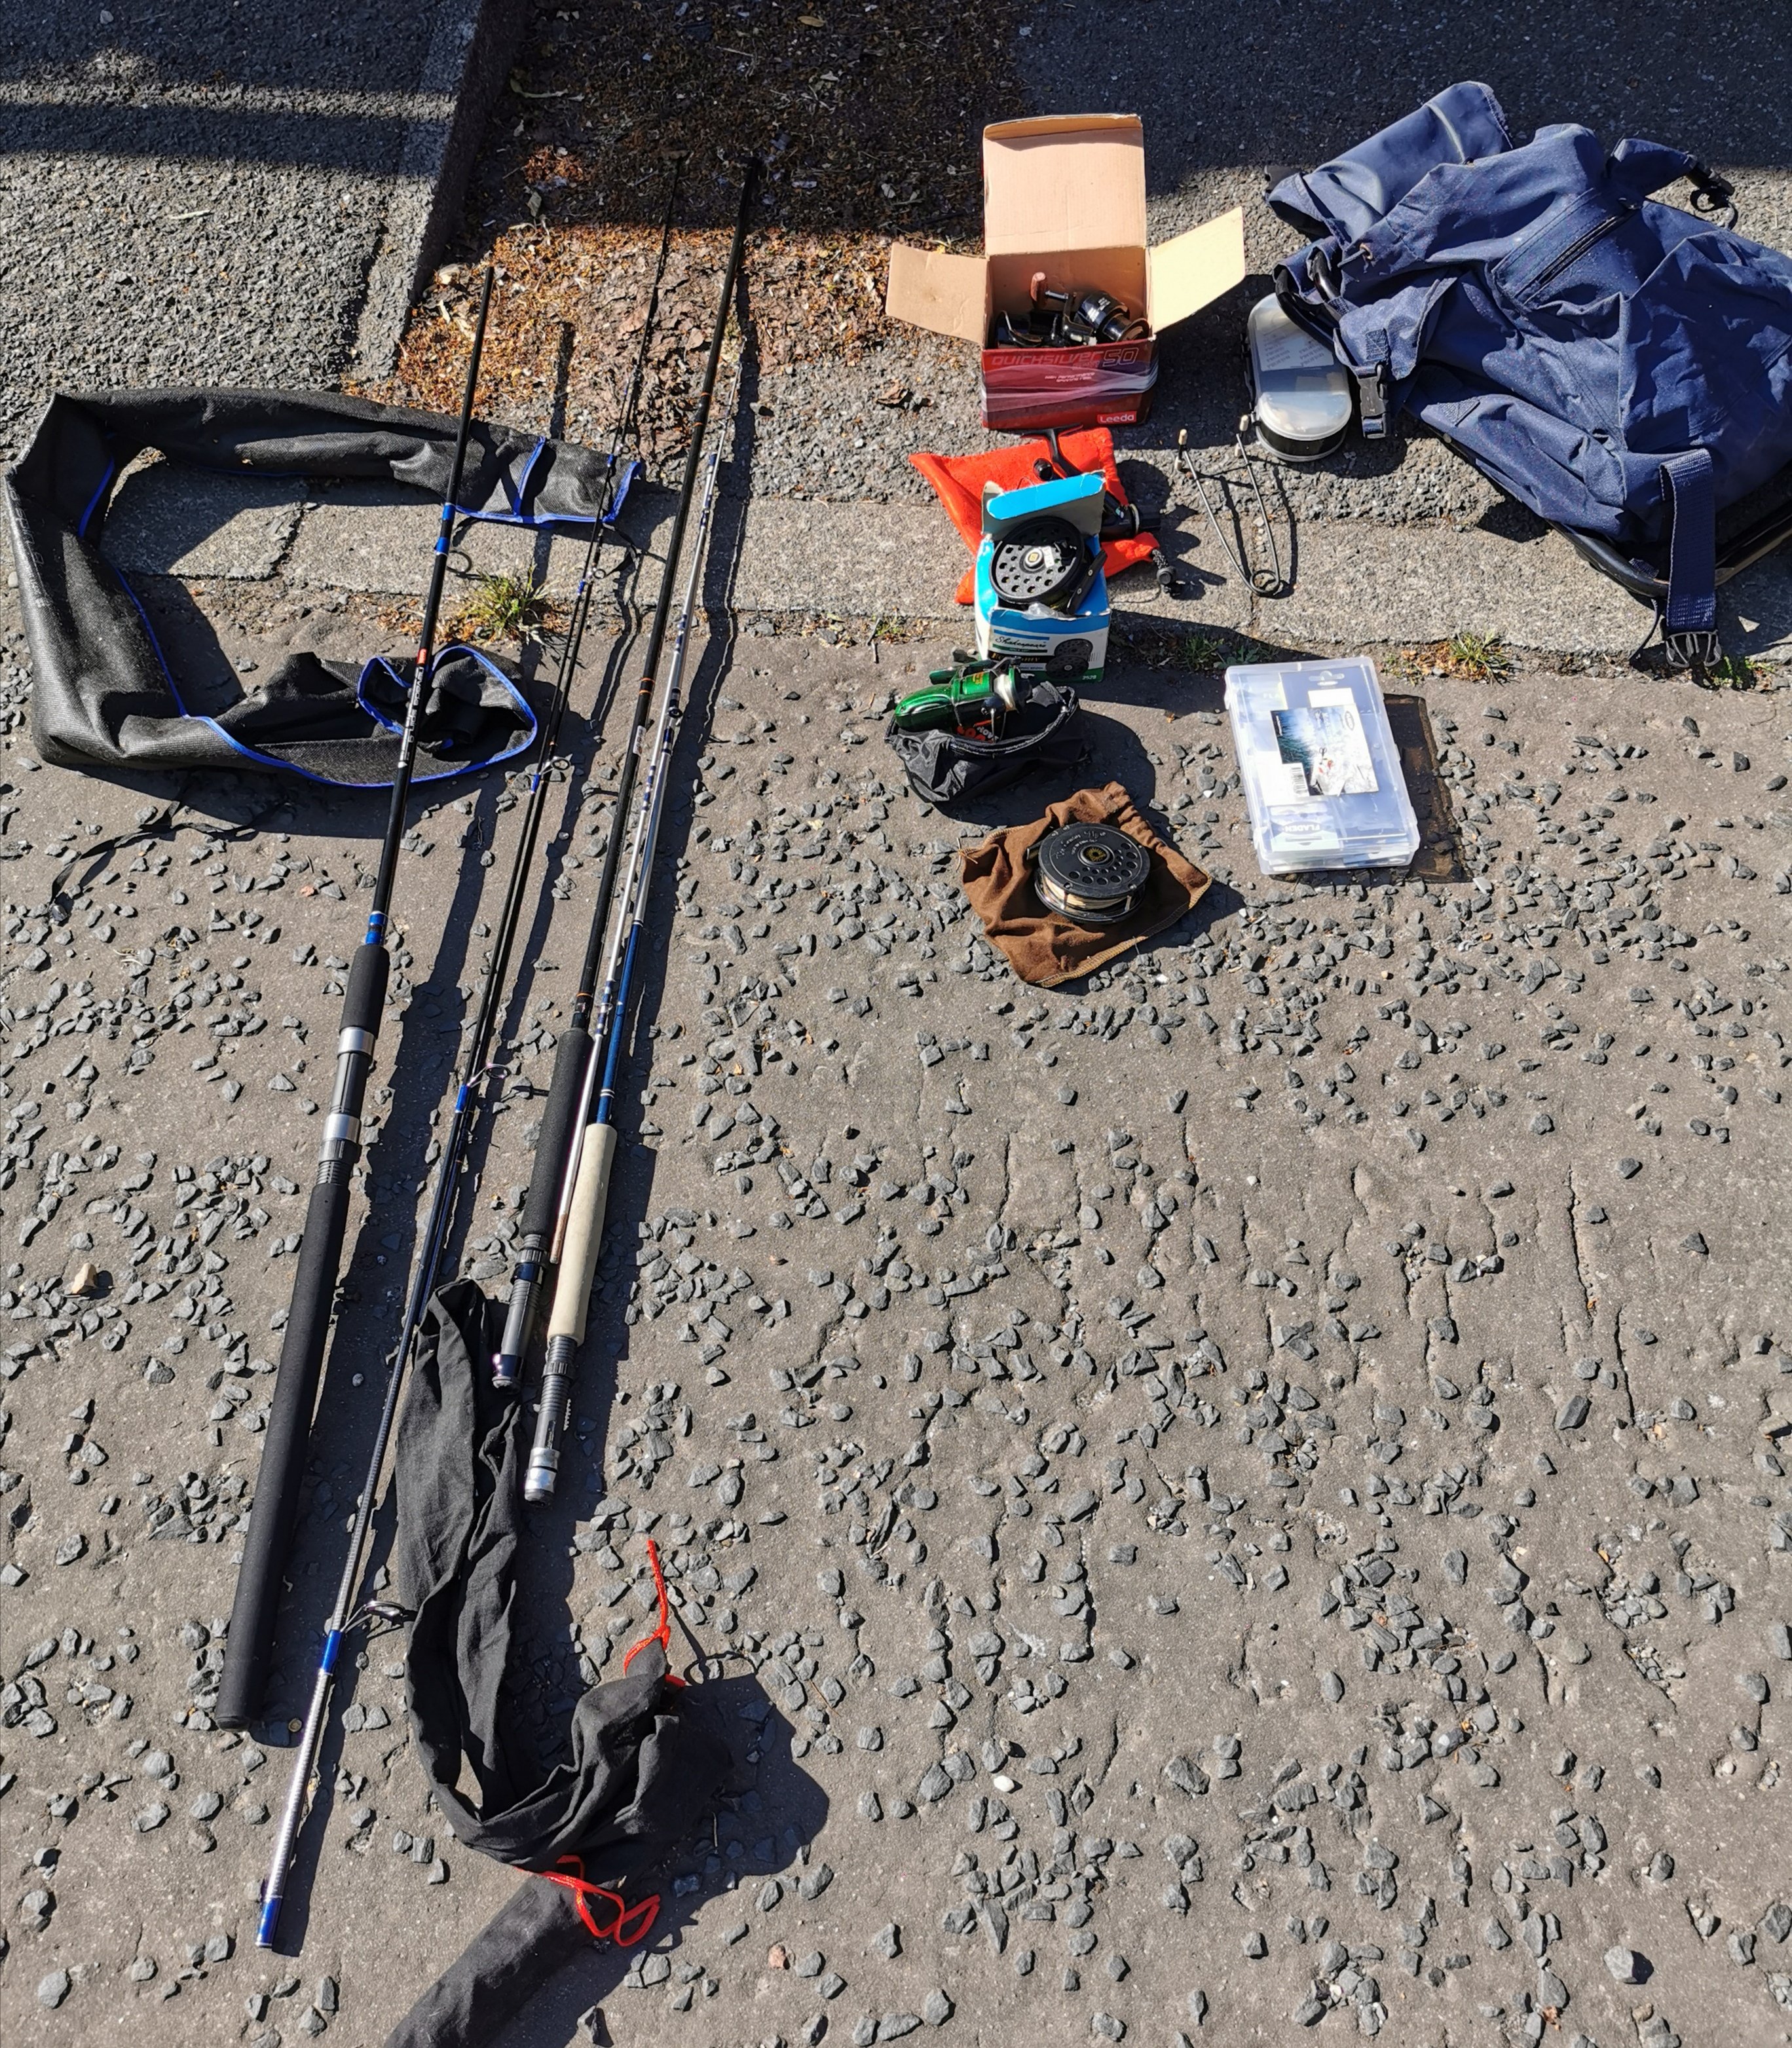 Fly fishing and fresh water rods reels etc 99 % unused